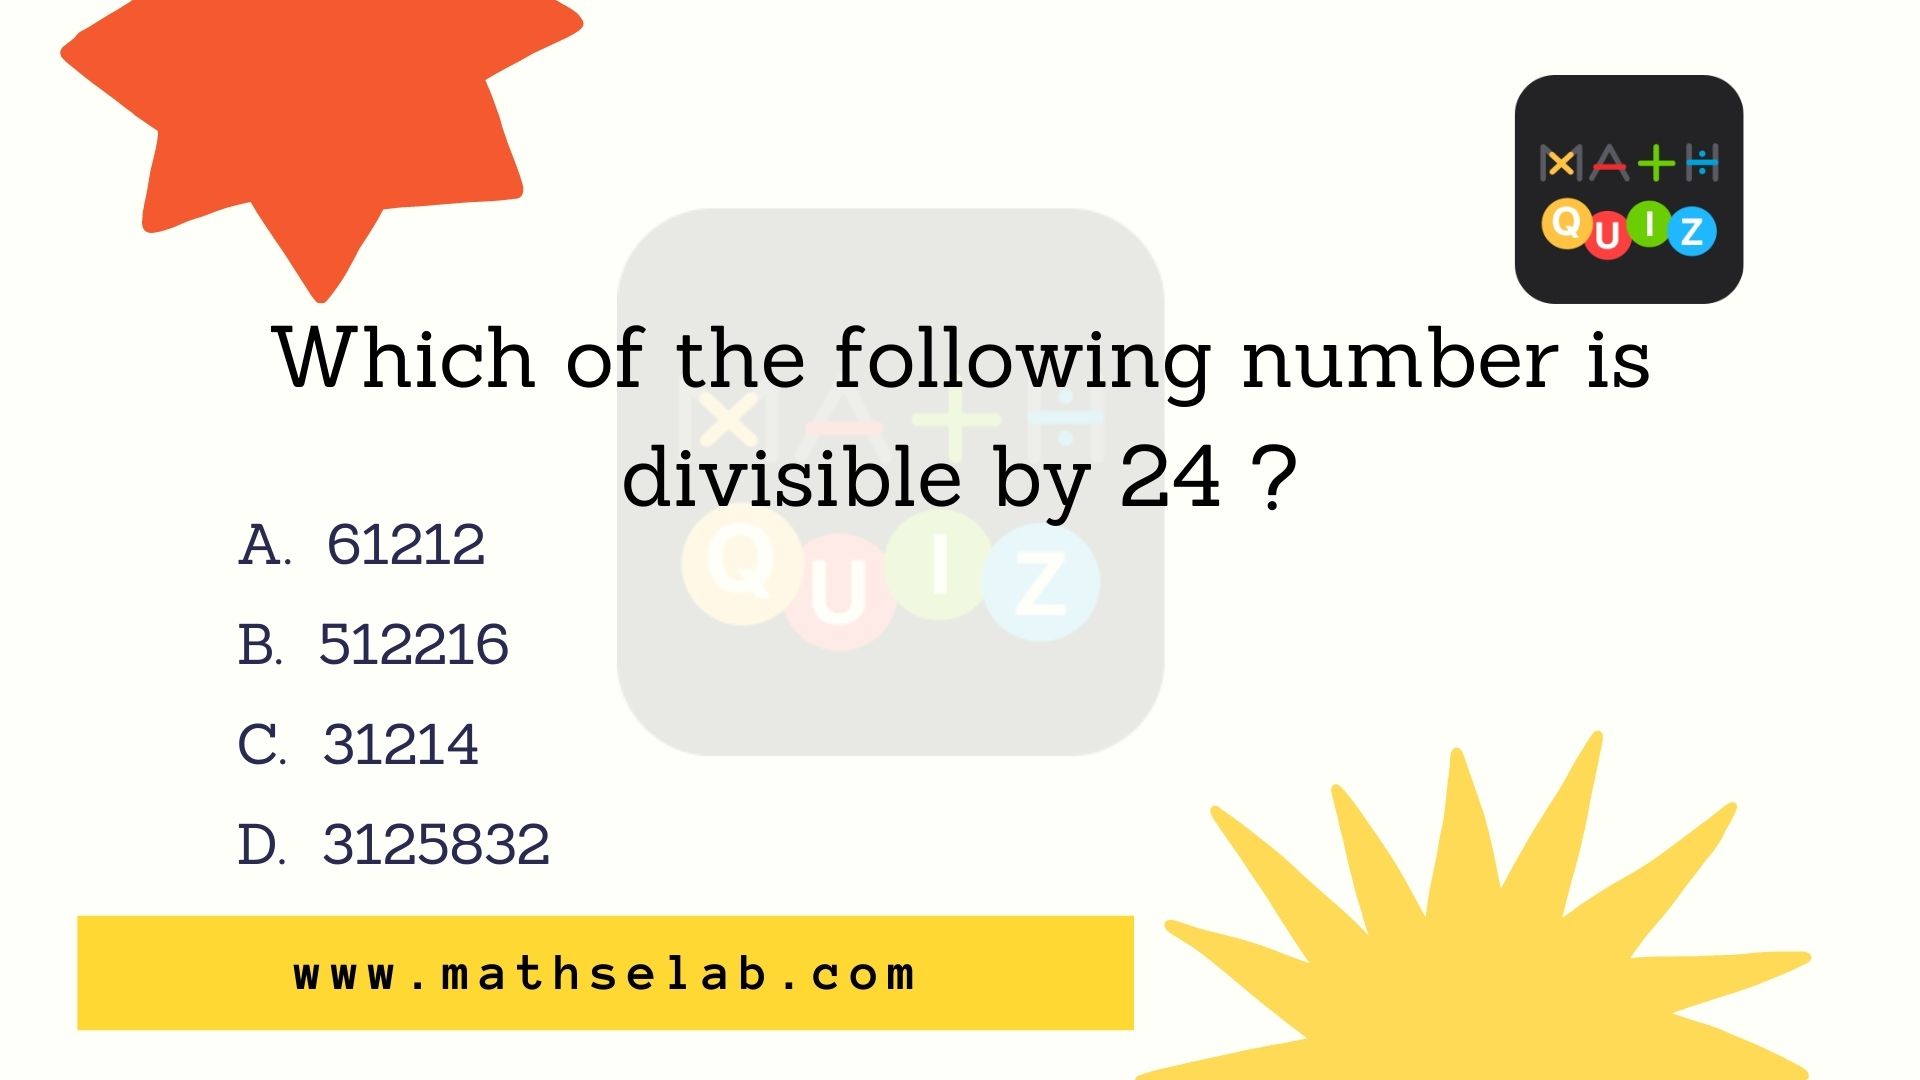 Which of the following number is divisible by 24 ? - mathselab.com